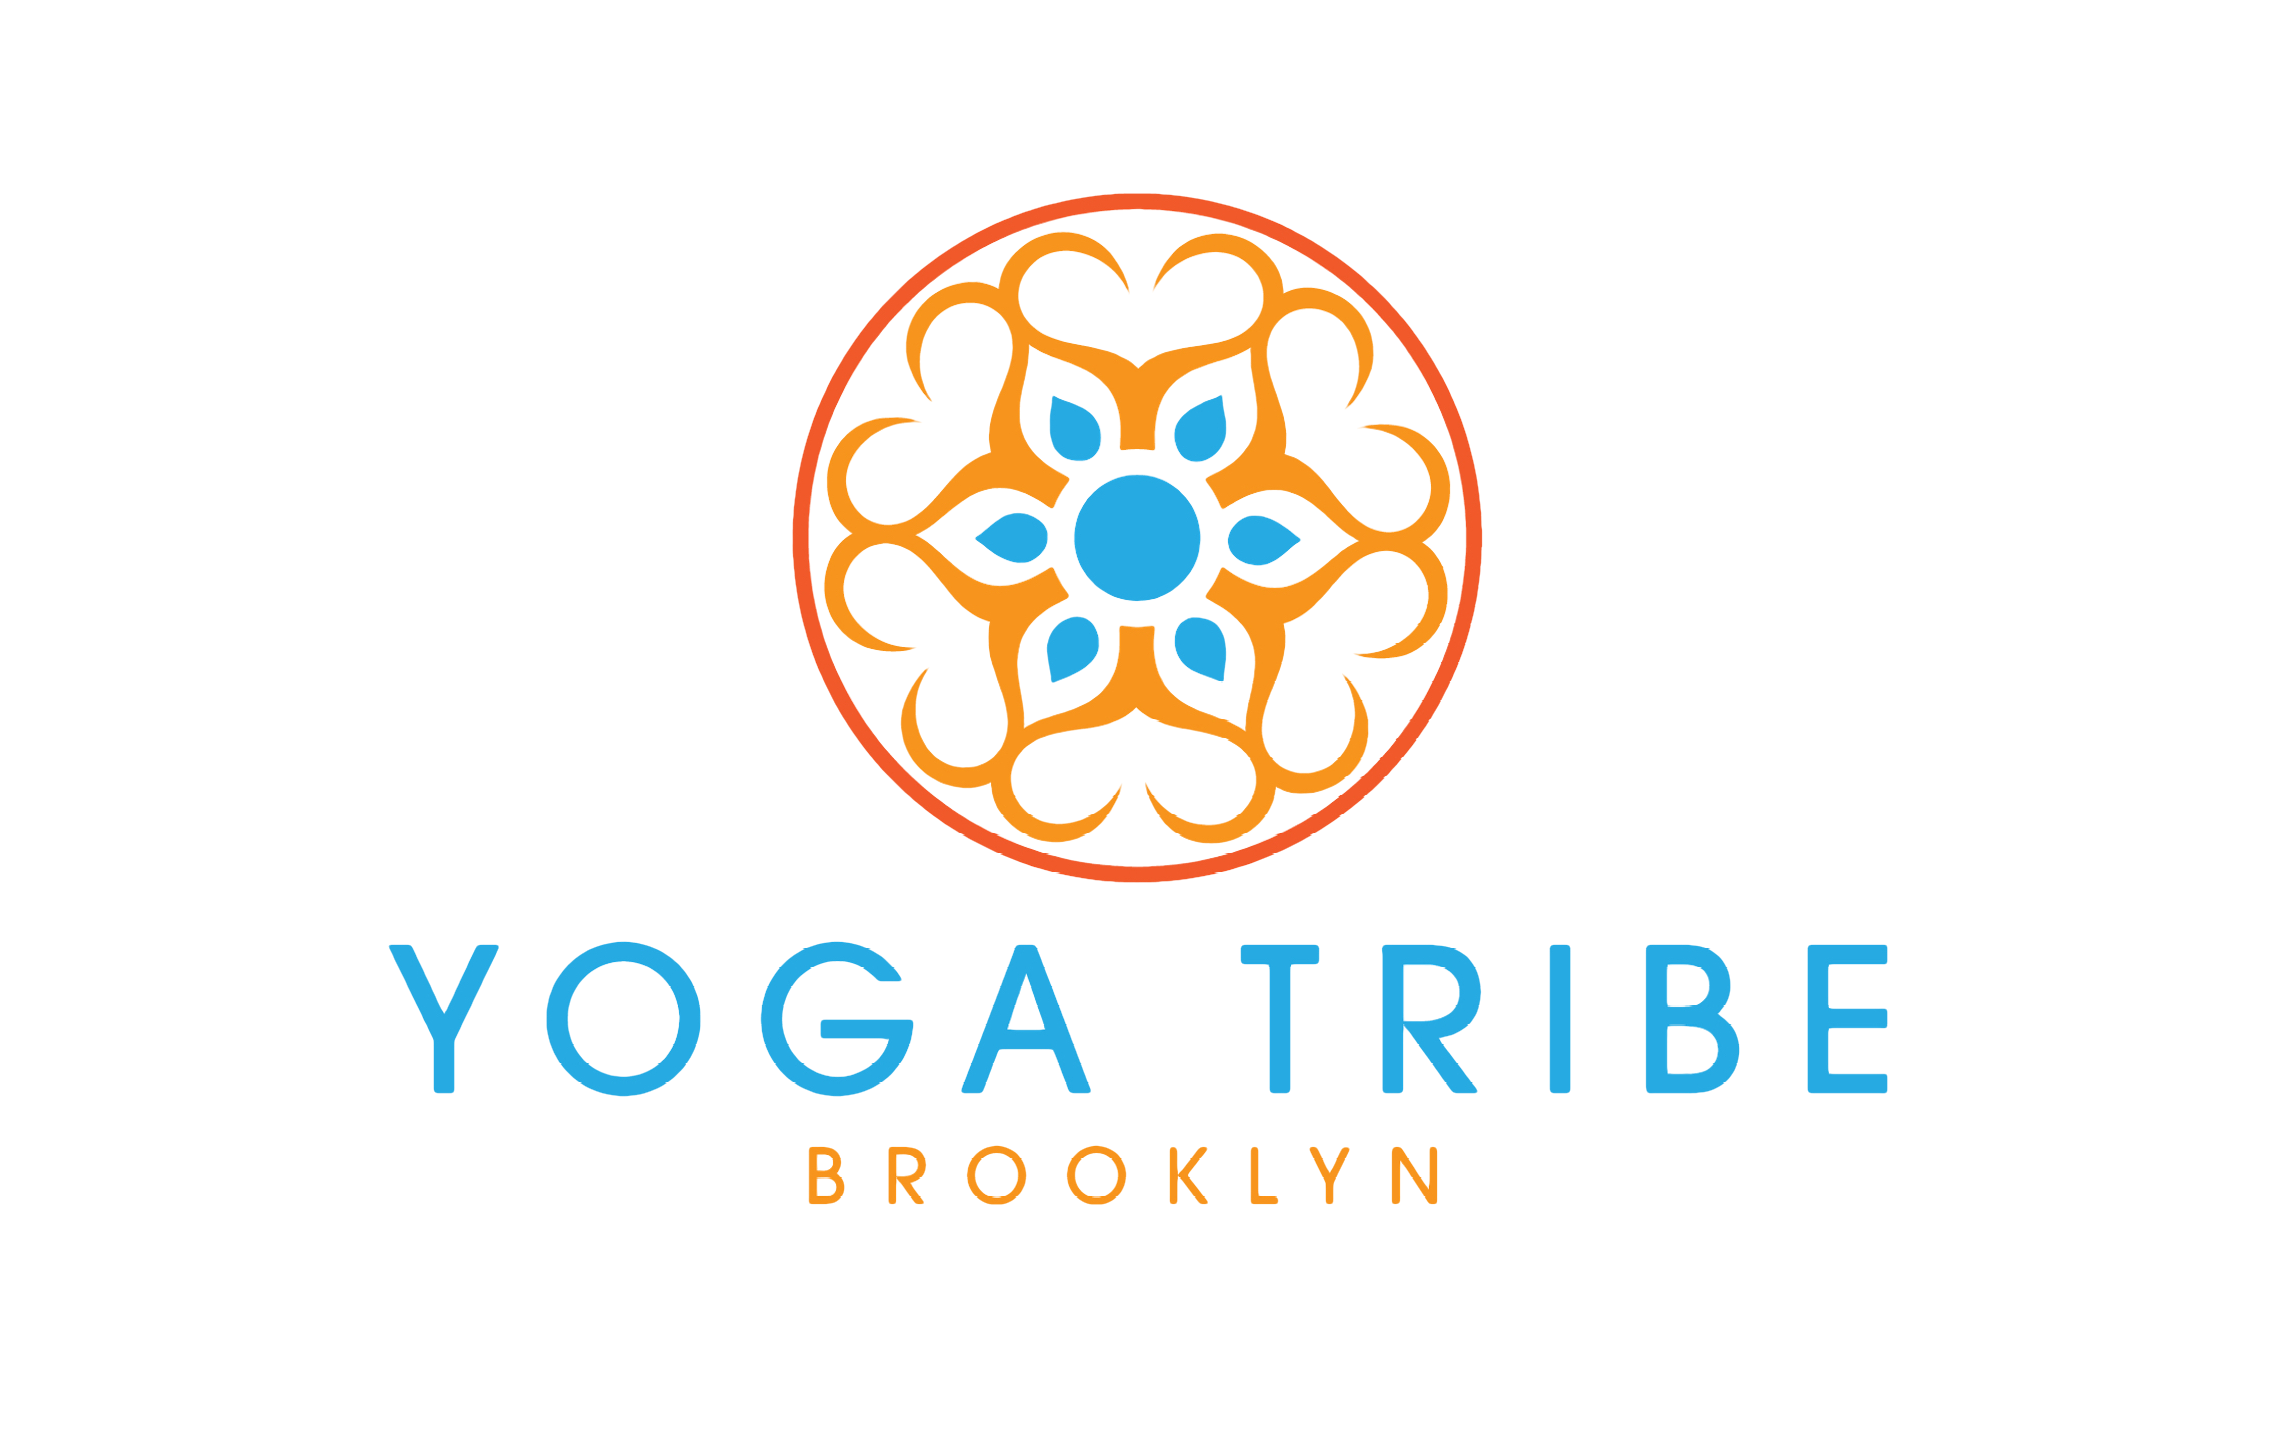 A Welcoming Space for Health and Healing - Yoga Tribe Brooklyn